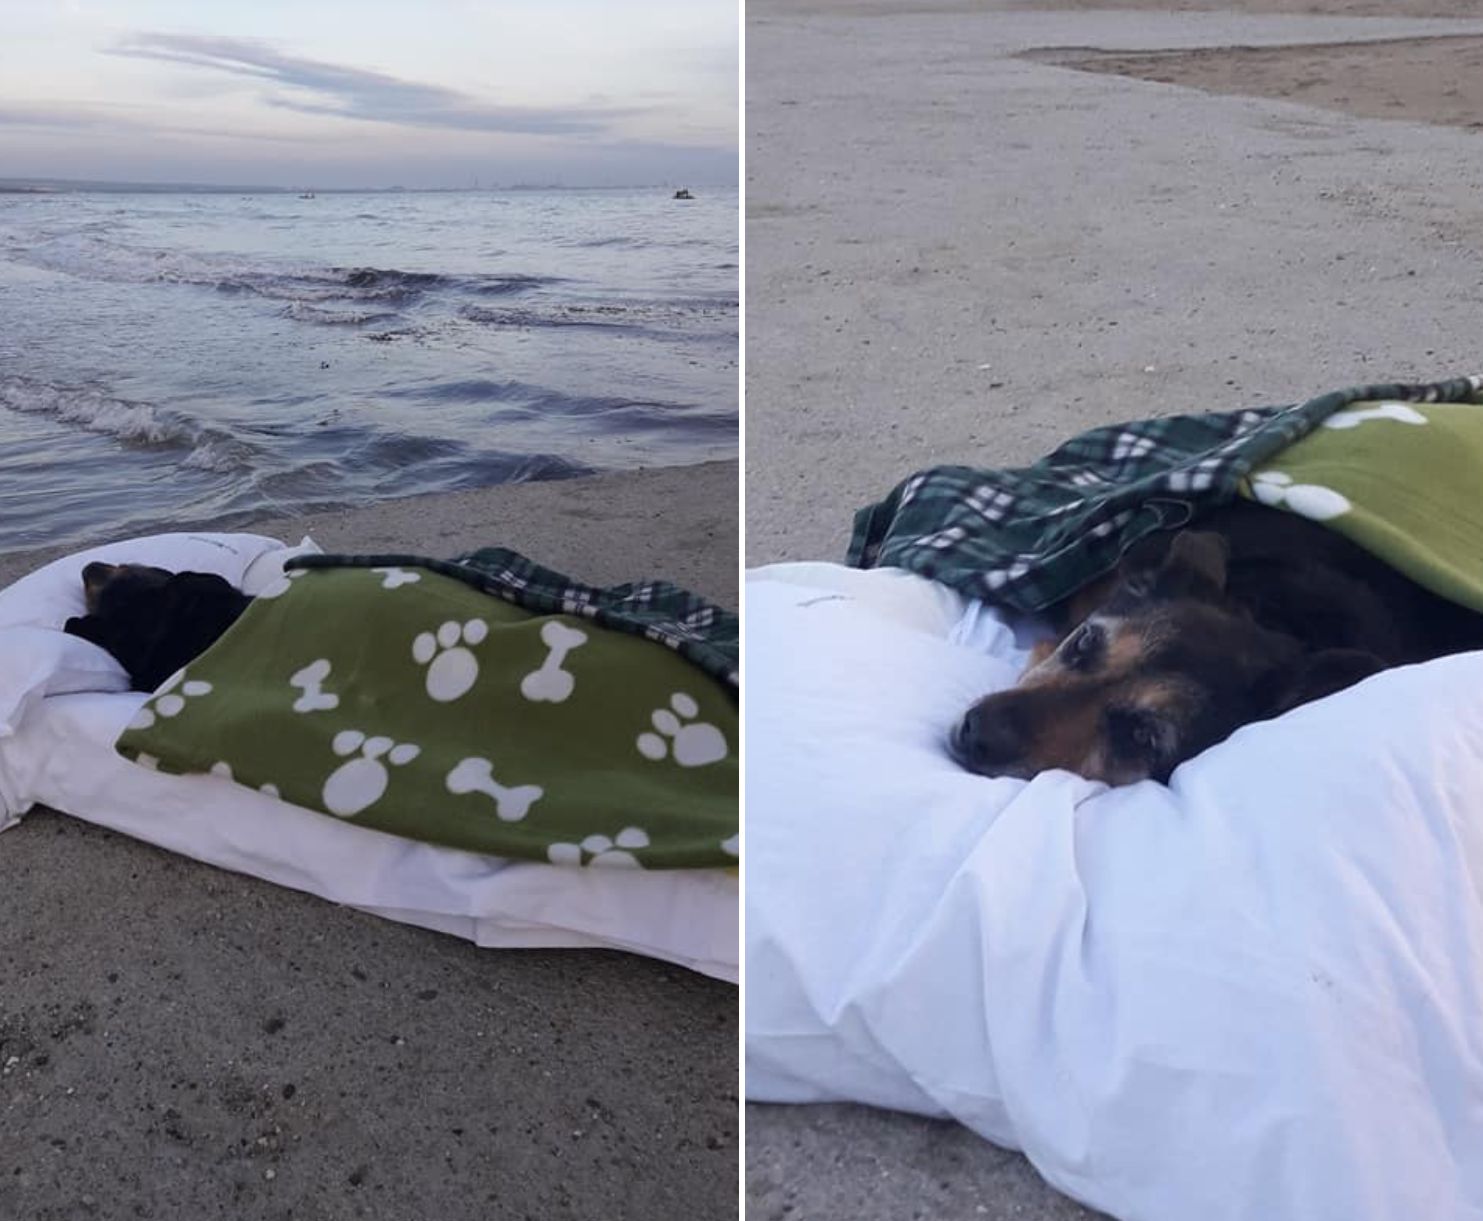 Beloved elderly dog rests on her comfortable dog bed at her favorite beach during her final moments of life